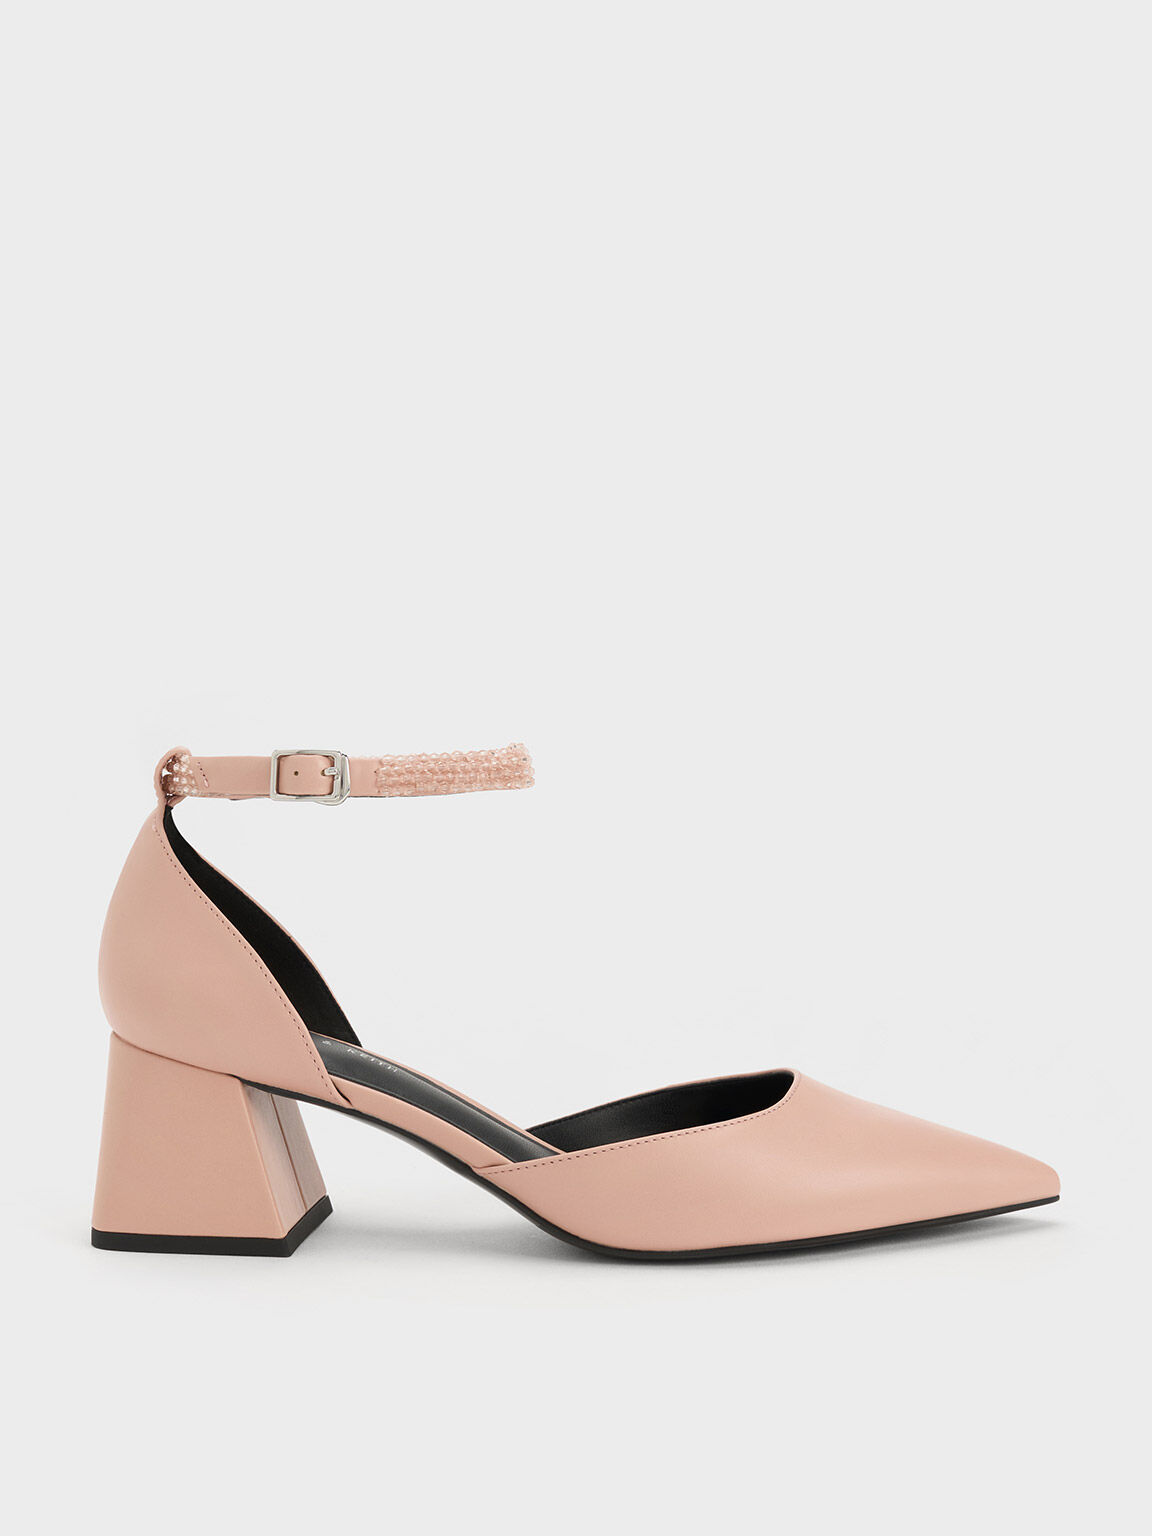 Nude Beaded Ankle-Strap D'Orsay Pumps - CHARLES & KEITH VN